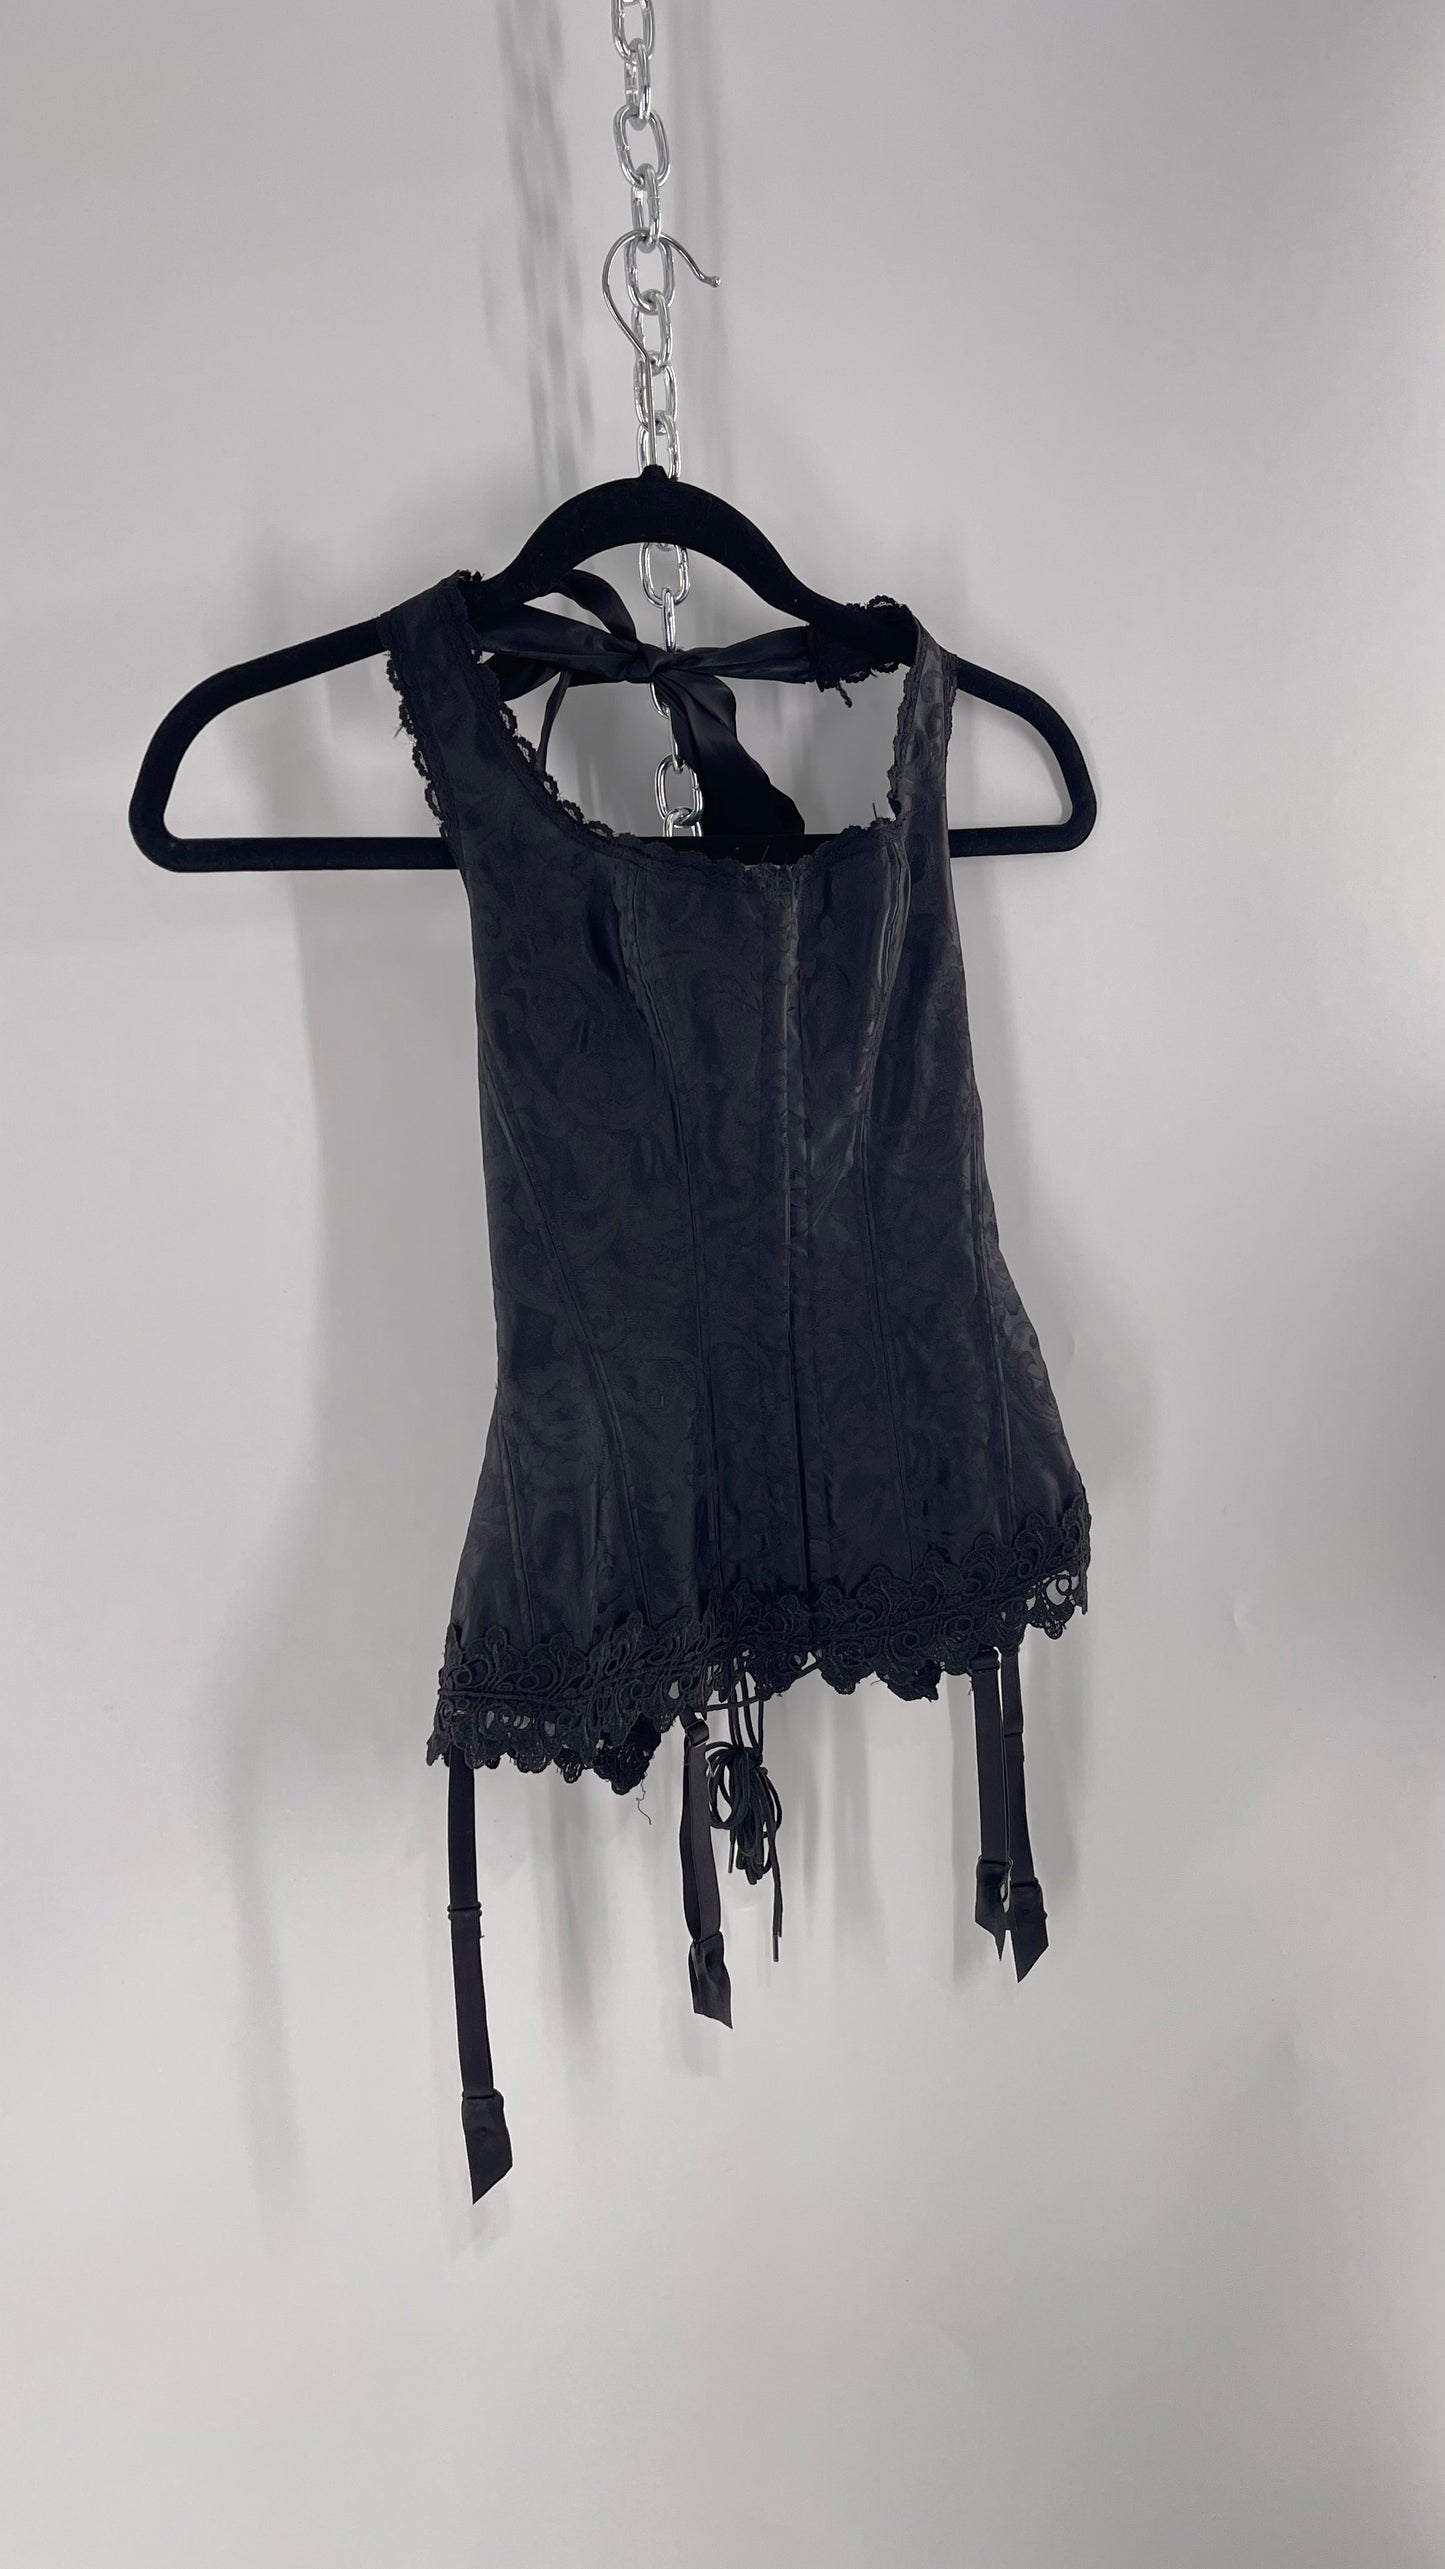 Vintage Fredericks of Hollywood Black Satin Brocade Lace Corset with Lace Tie Halter  (32)